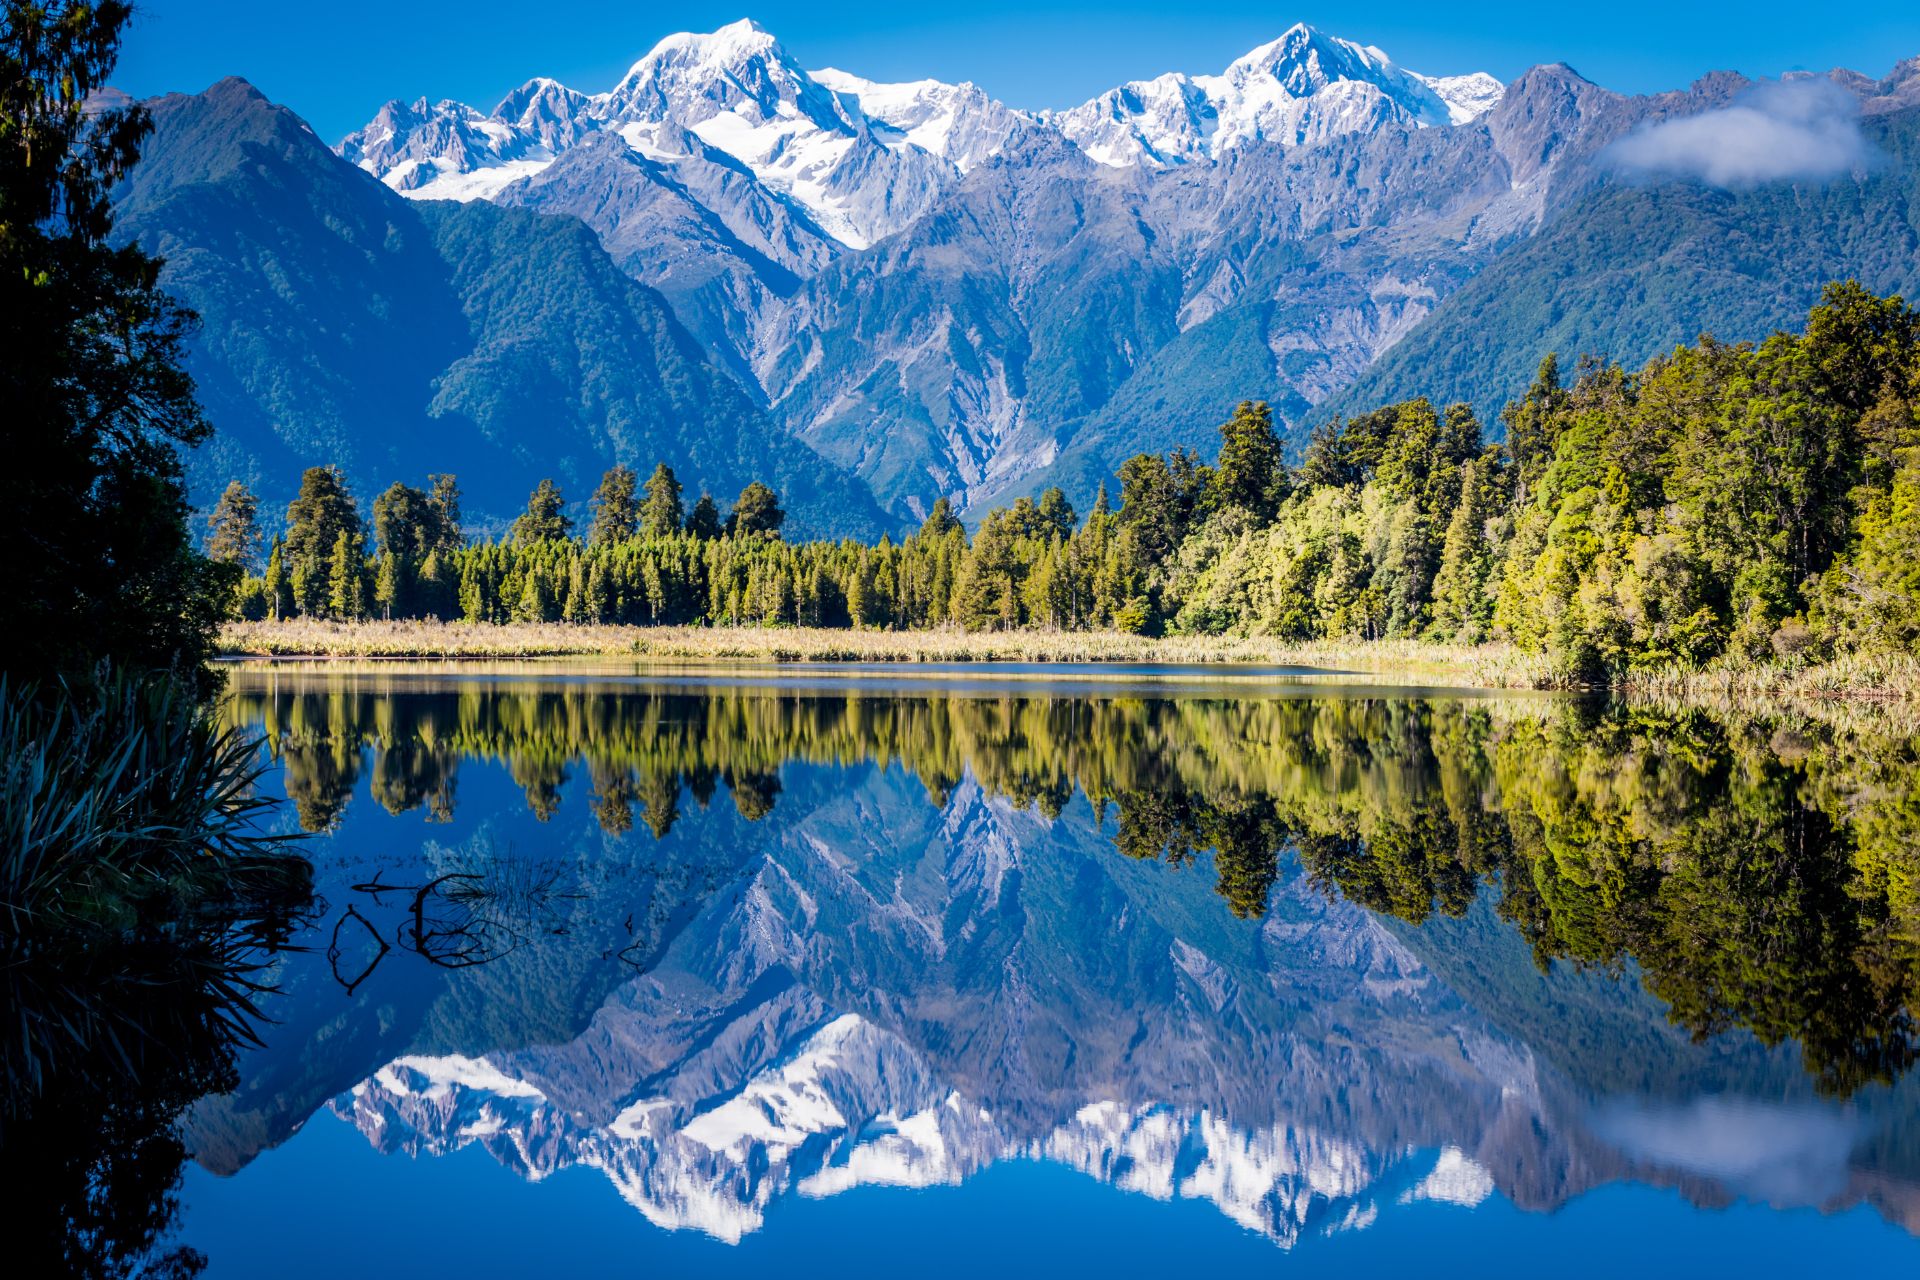 New Zealand, South Island New Zealand by Ali Saadat from Getty Images